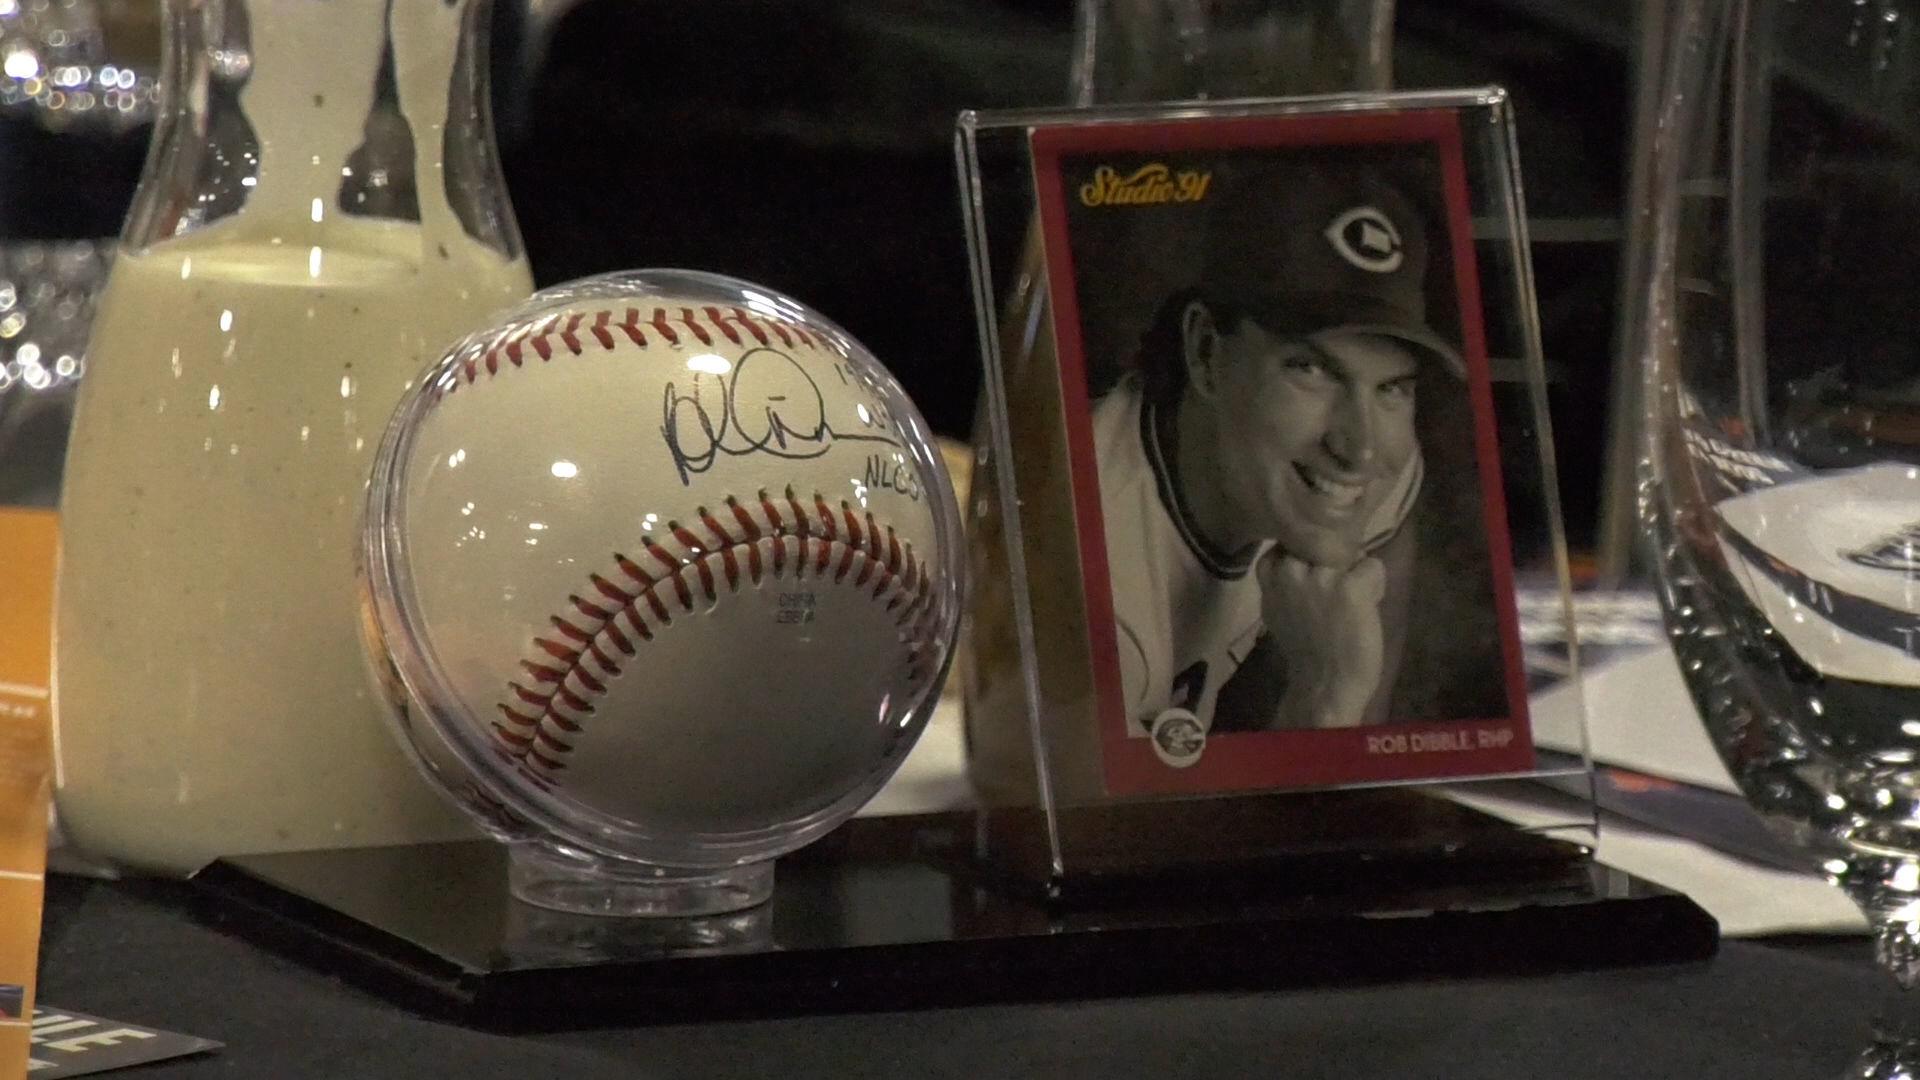 VIDEO: Hot Rods charity dinner brings Reds icon Rob Dibble to